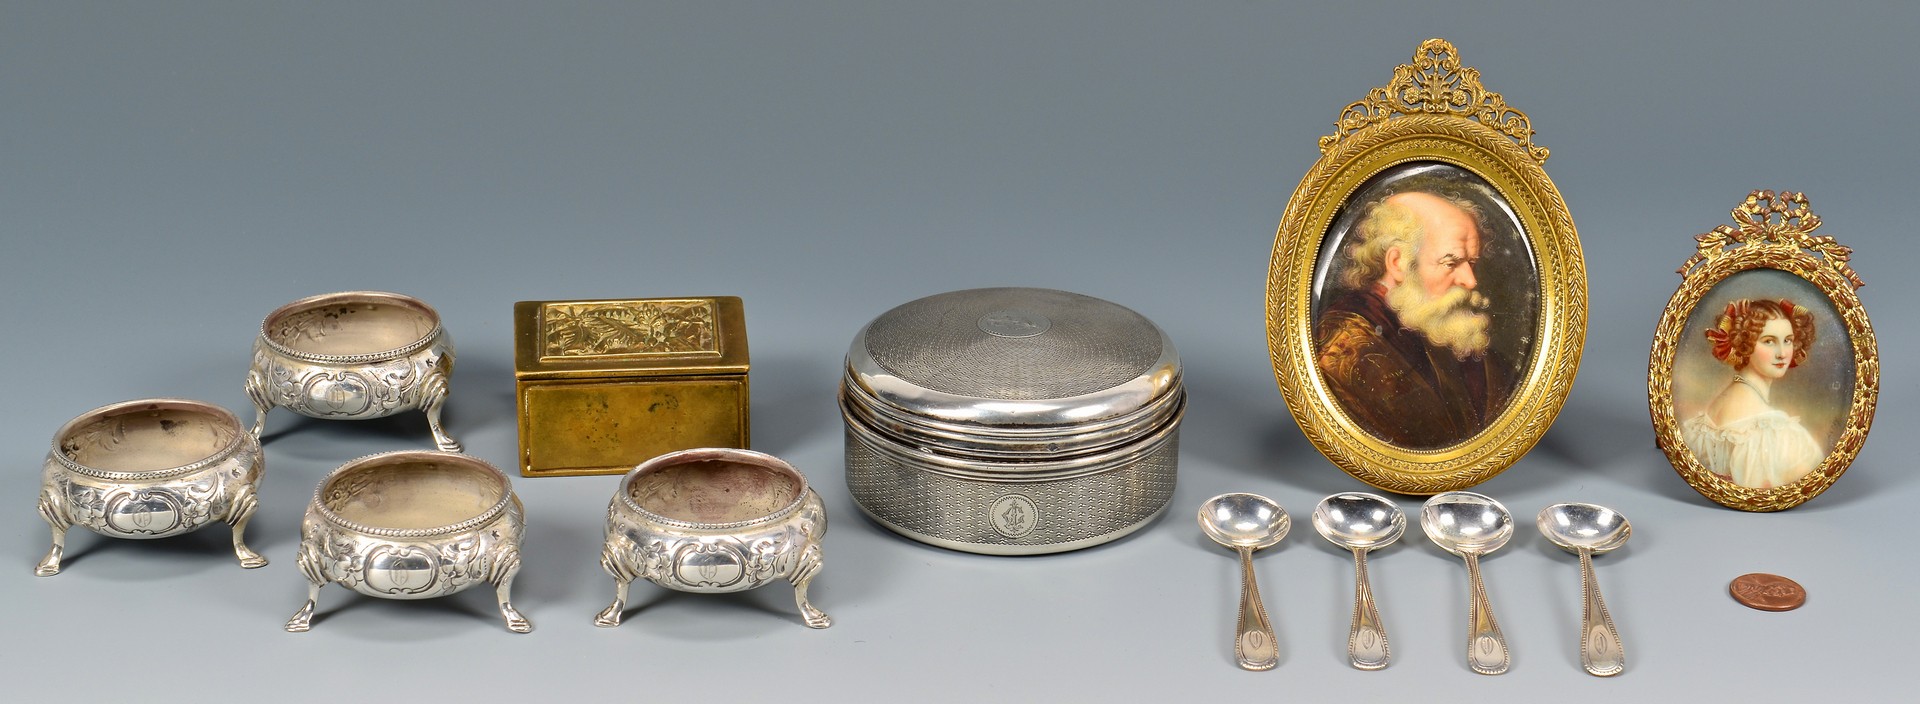 Lot 83: Decorative Accessories incl Tiffany & Sterling